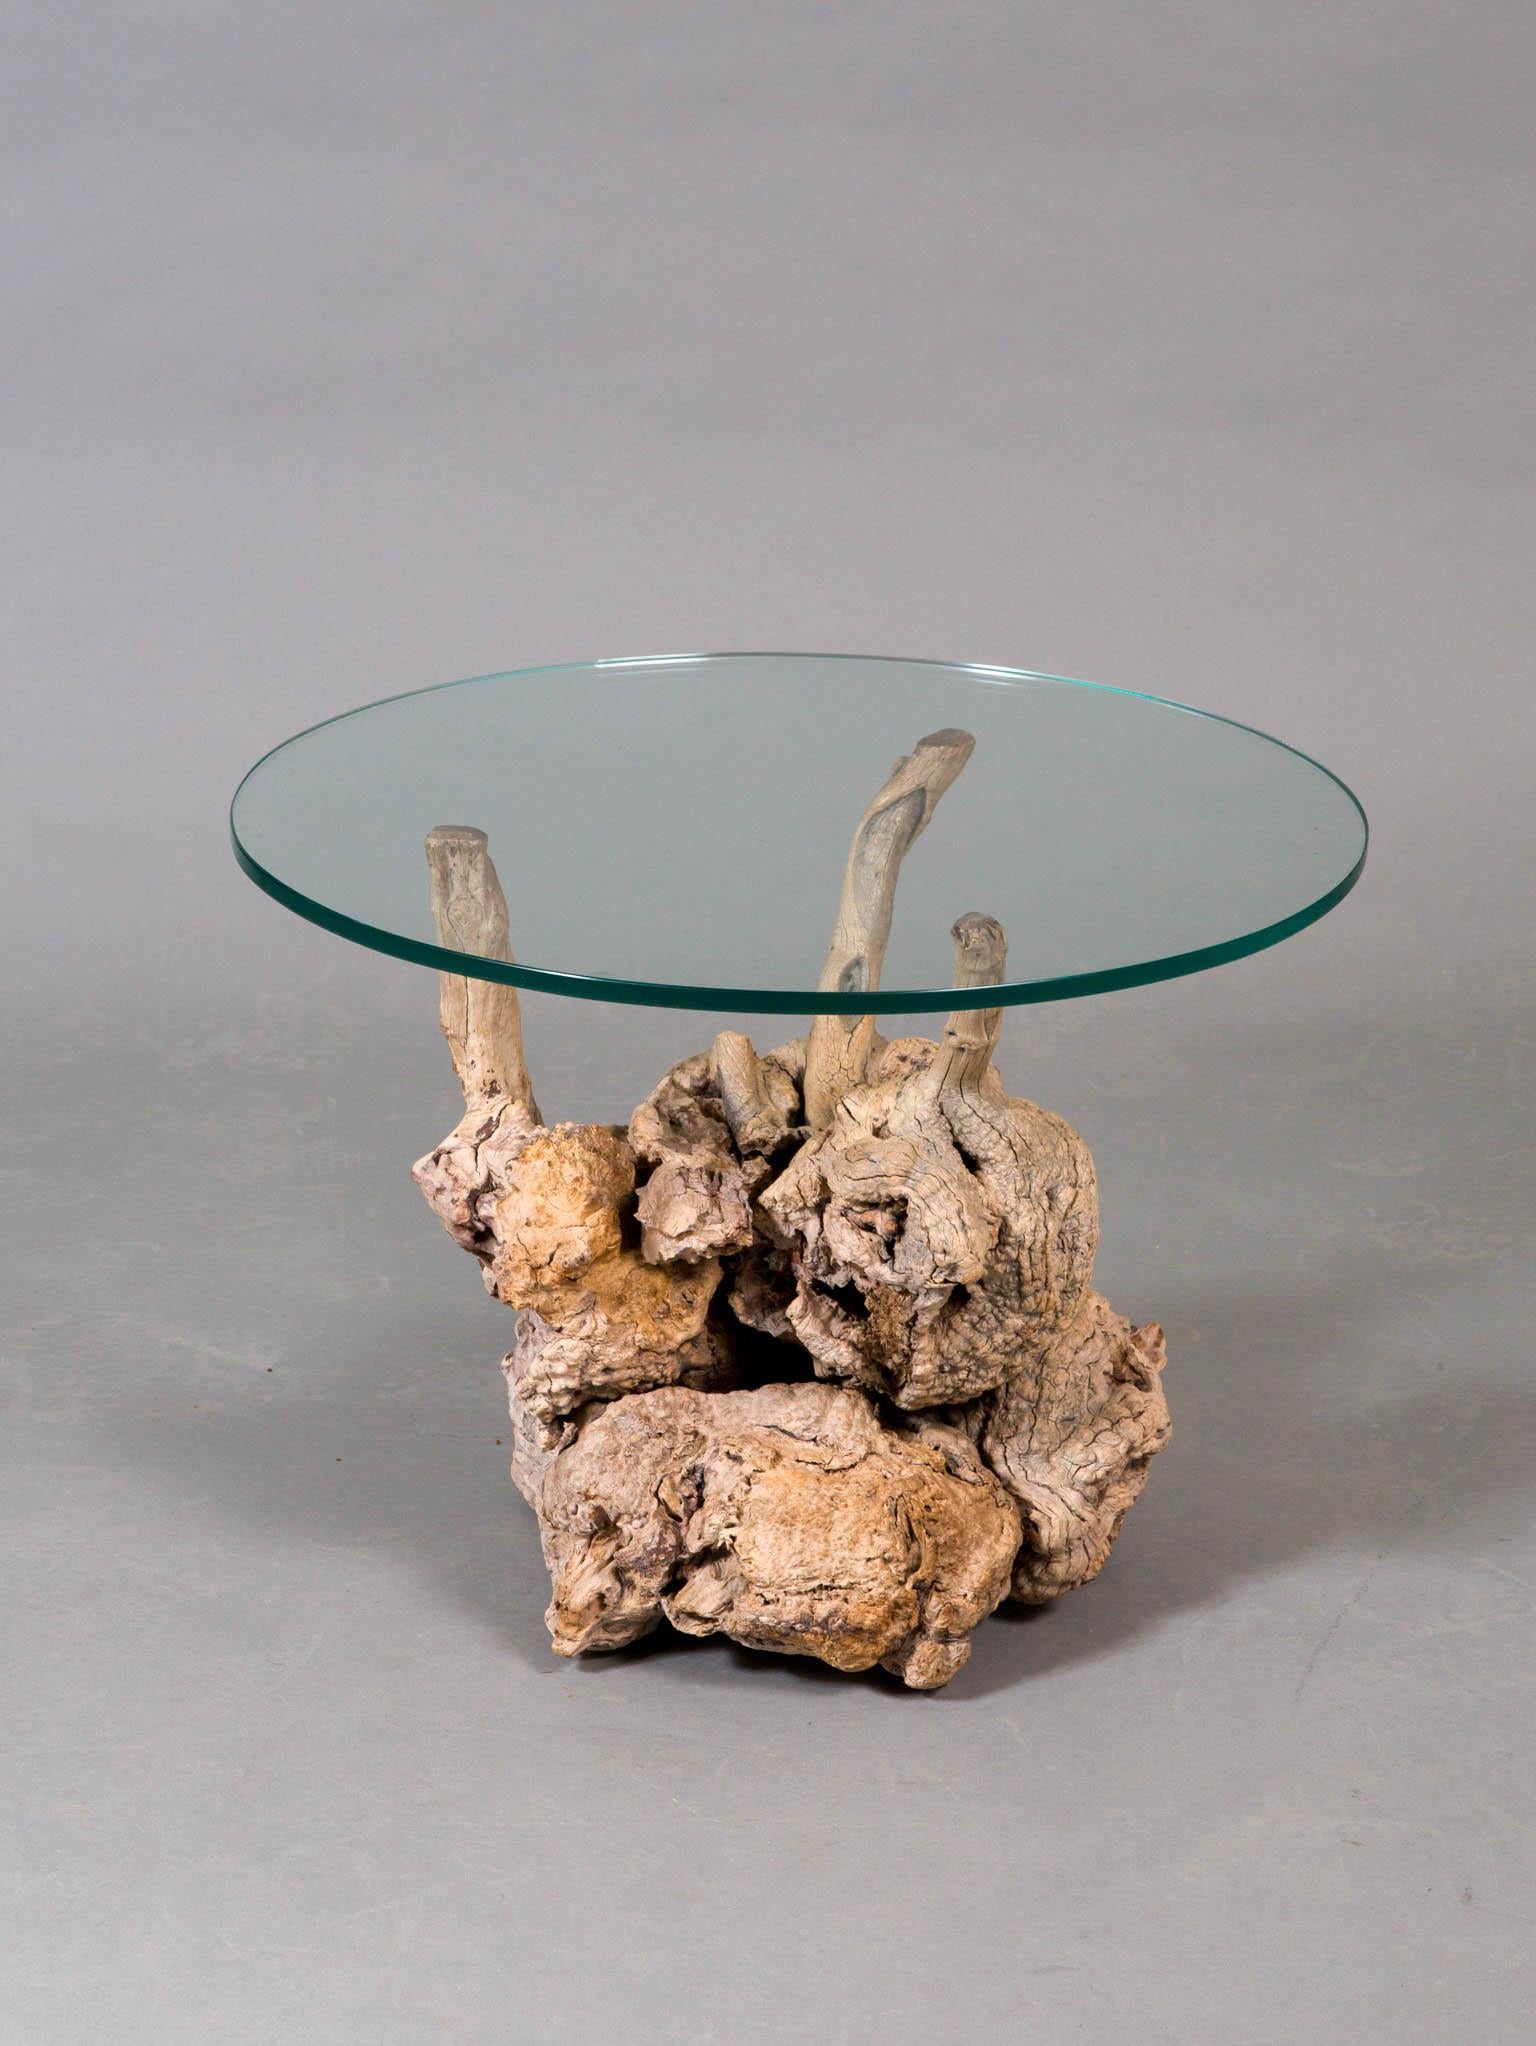 Sculptural pair of midcentury organic root side tables with round glass tops.